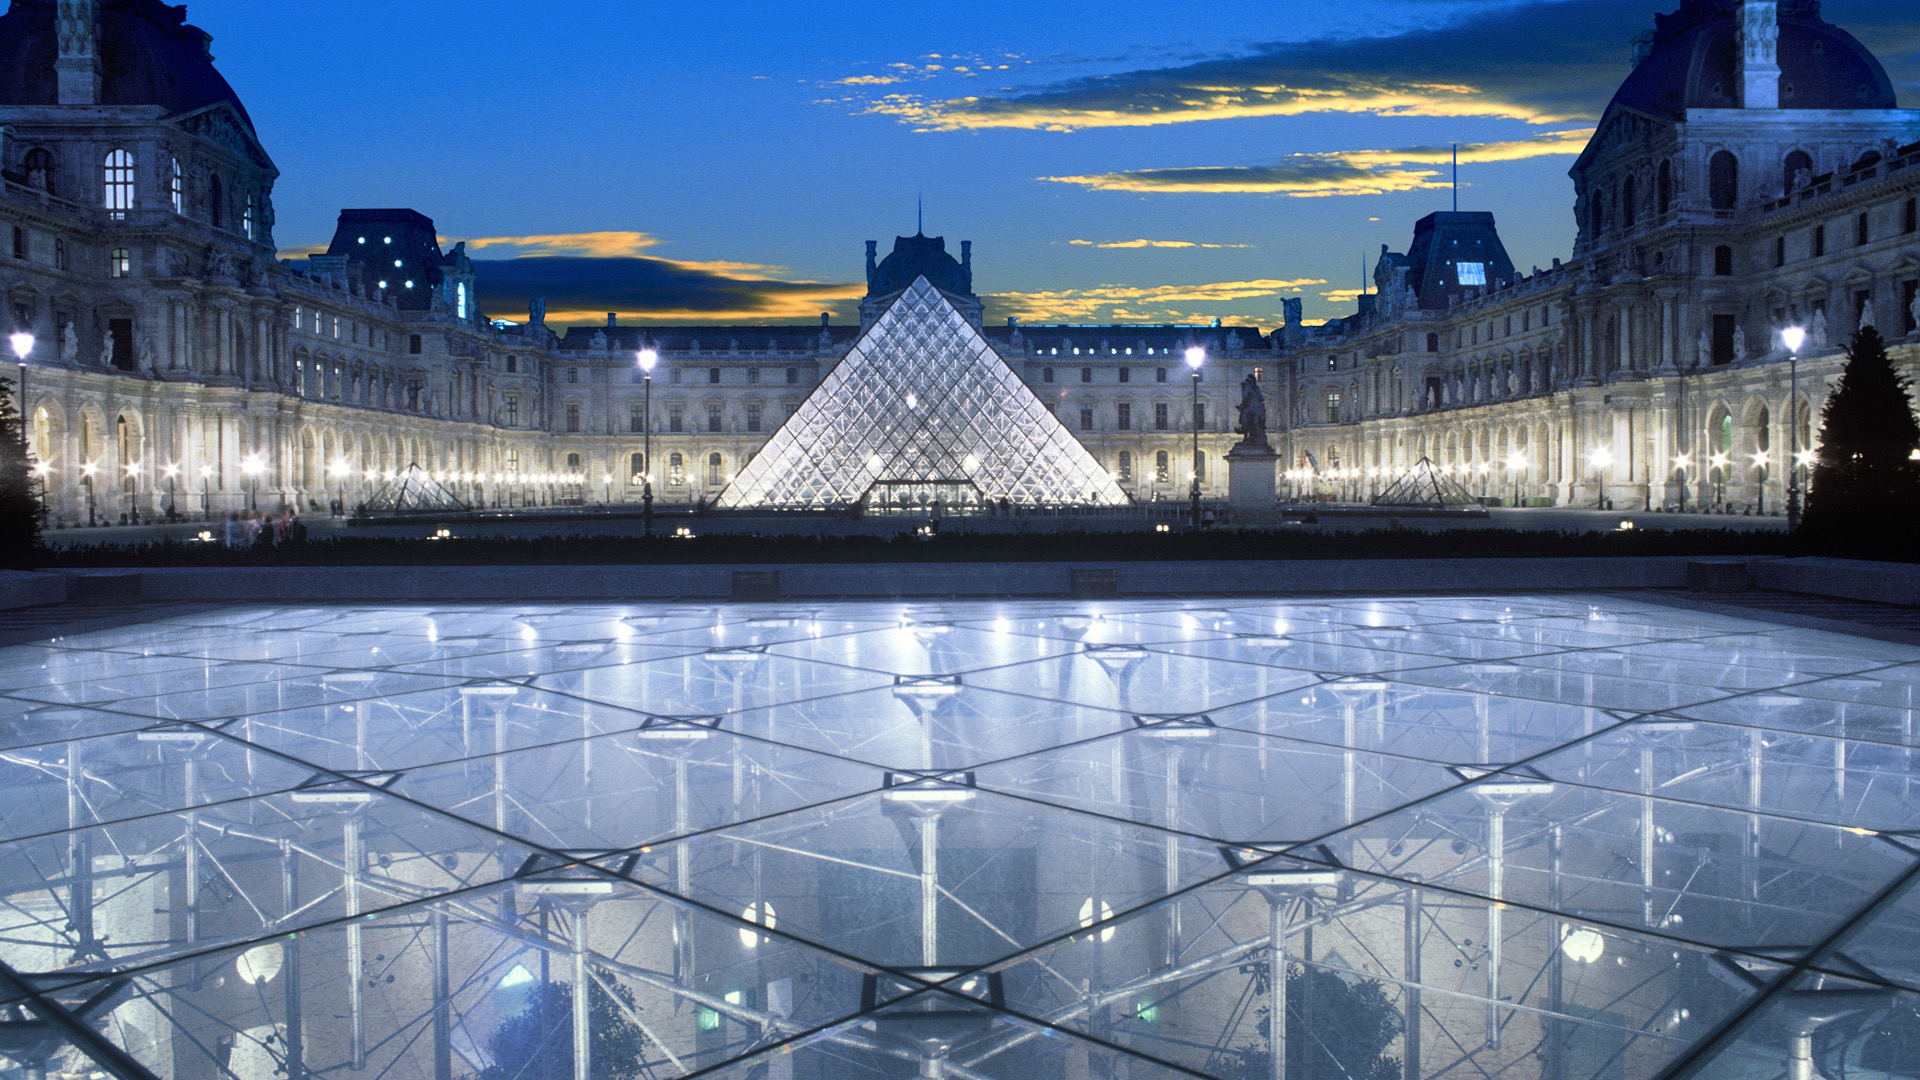 The Louvre Art Museum By Jairon H